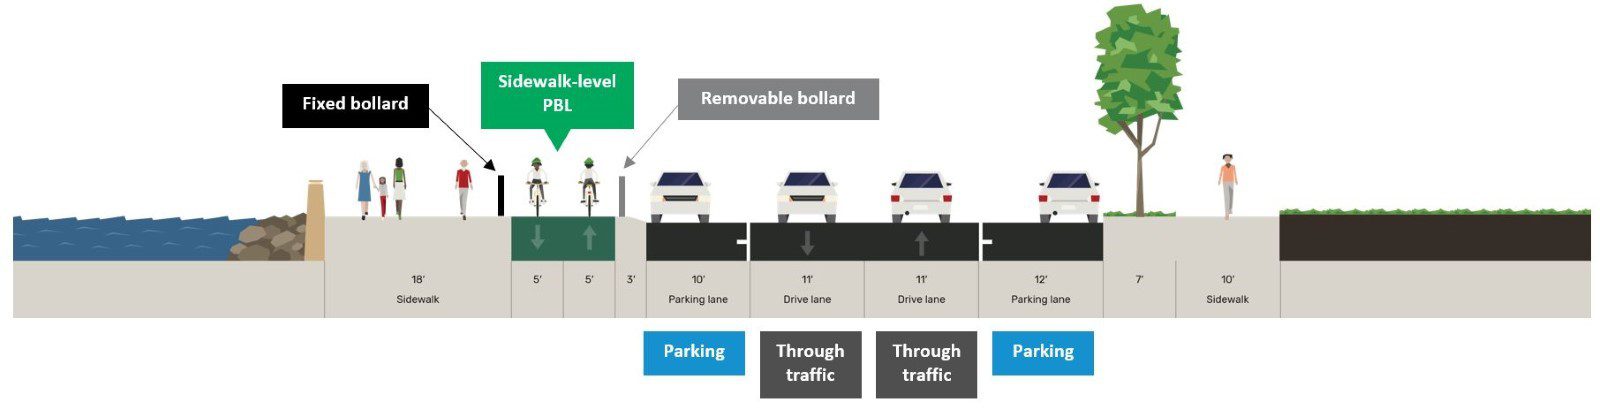 A graphic showing a cross section of the street level view of another possible design on Alaskan Way, with widened pedestrian walkways on either side of the street. The existing parking lane on the west side (waterfront side) is converted into a protected bike lane with fixed bollards on the west side and removable bollards on the west side of the lane. Existing drive lanes are shifted to allow parking lanes on both sides of the street and just one lane of through traffic headed in each direction.